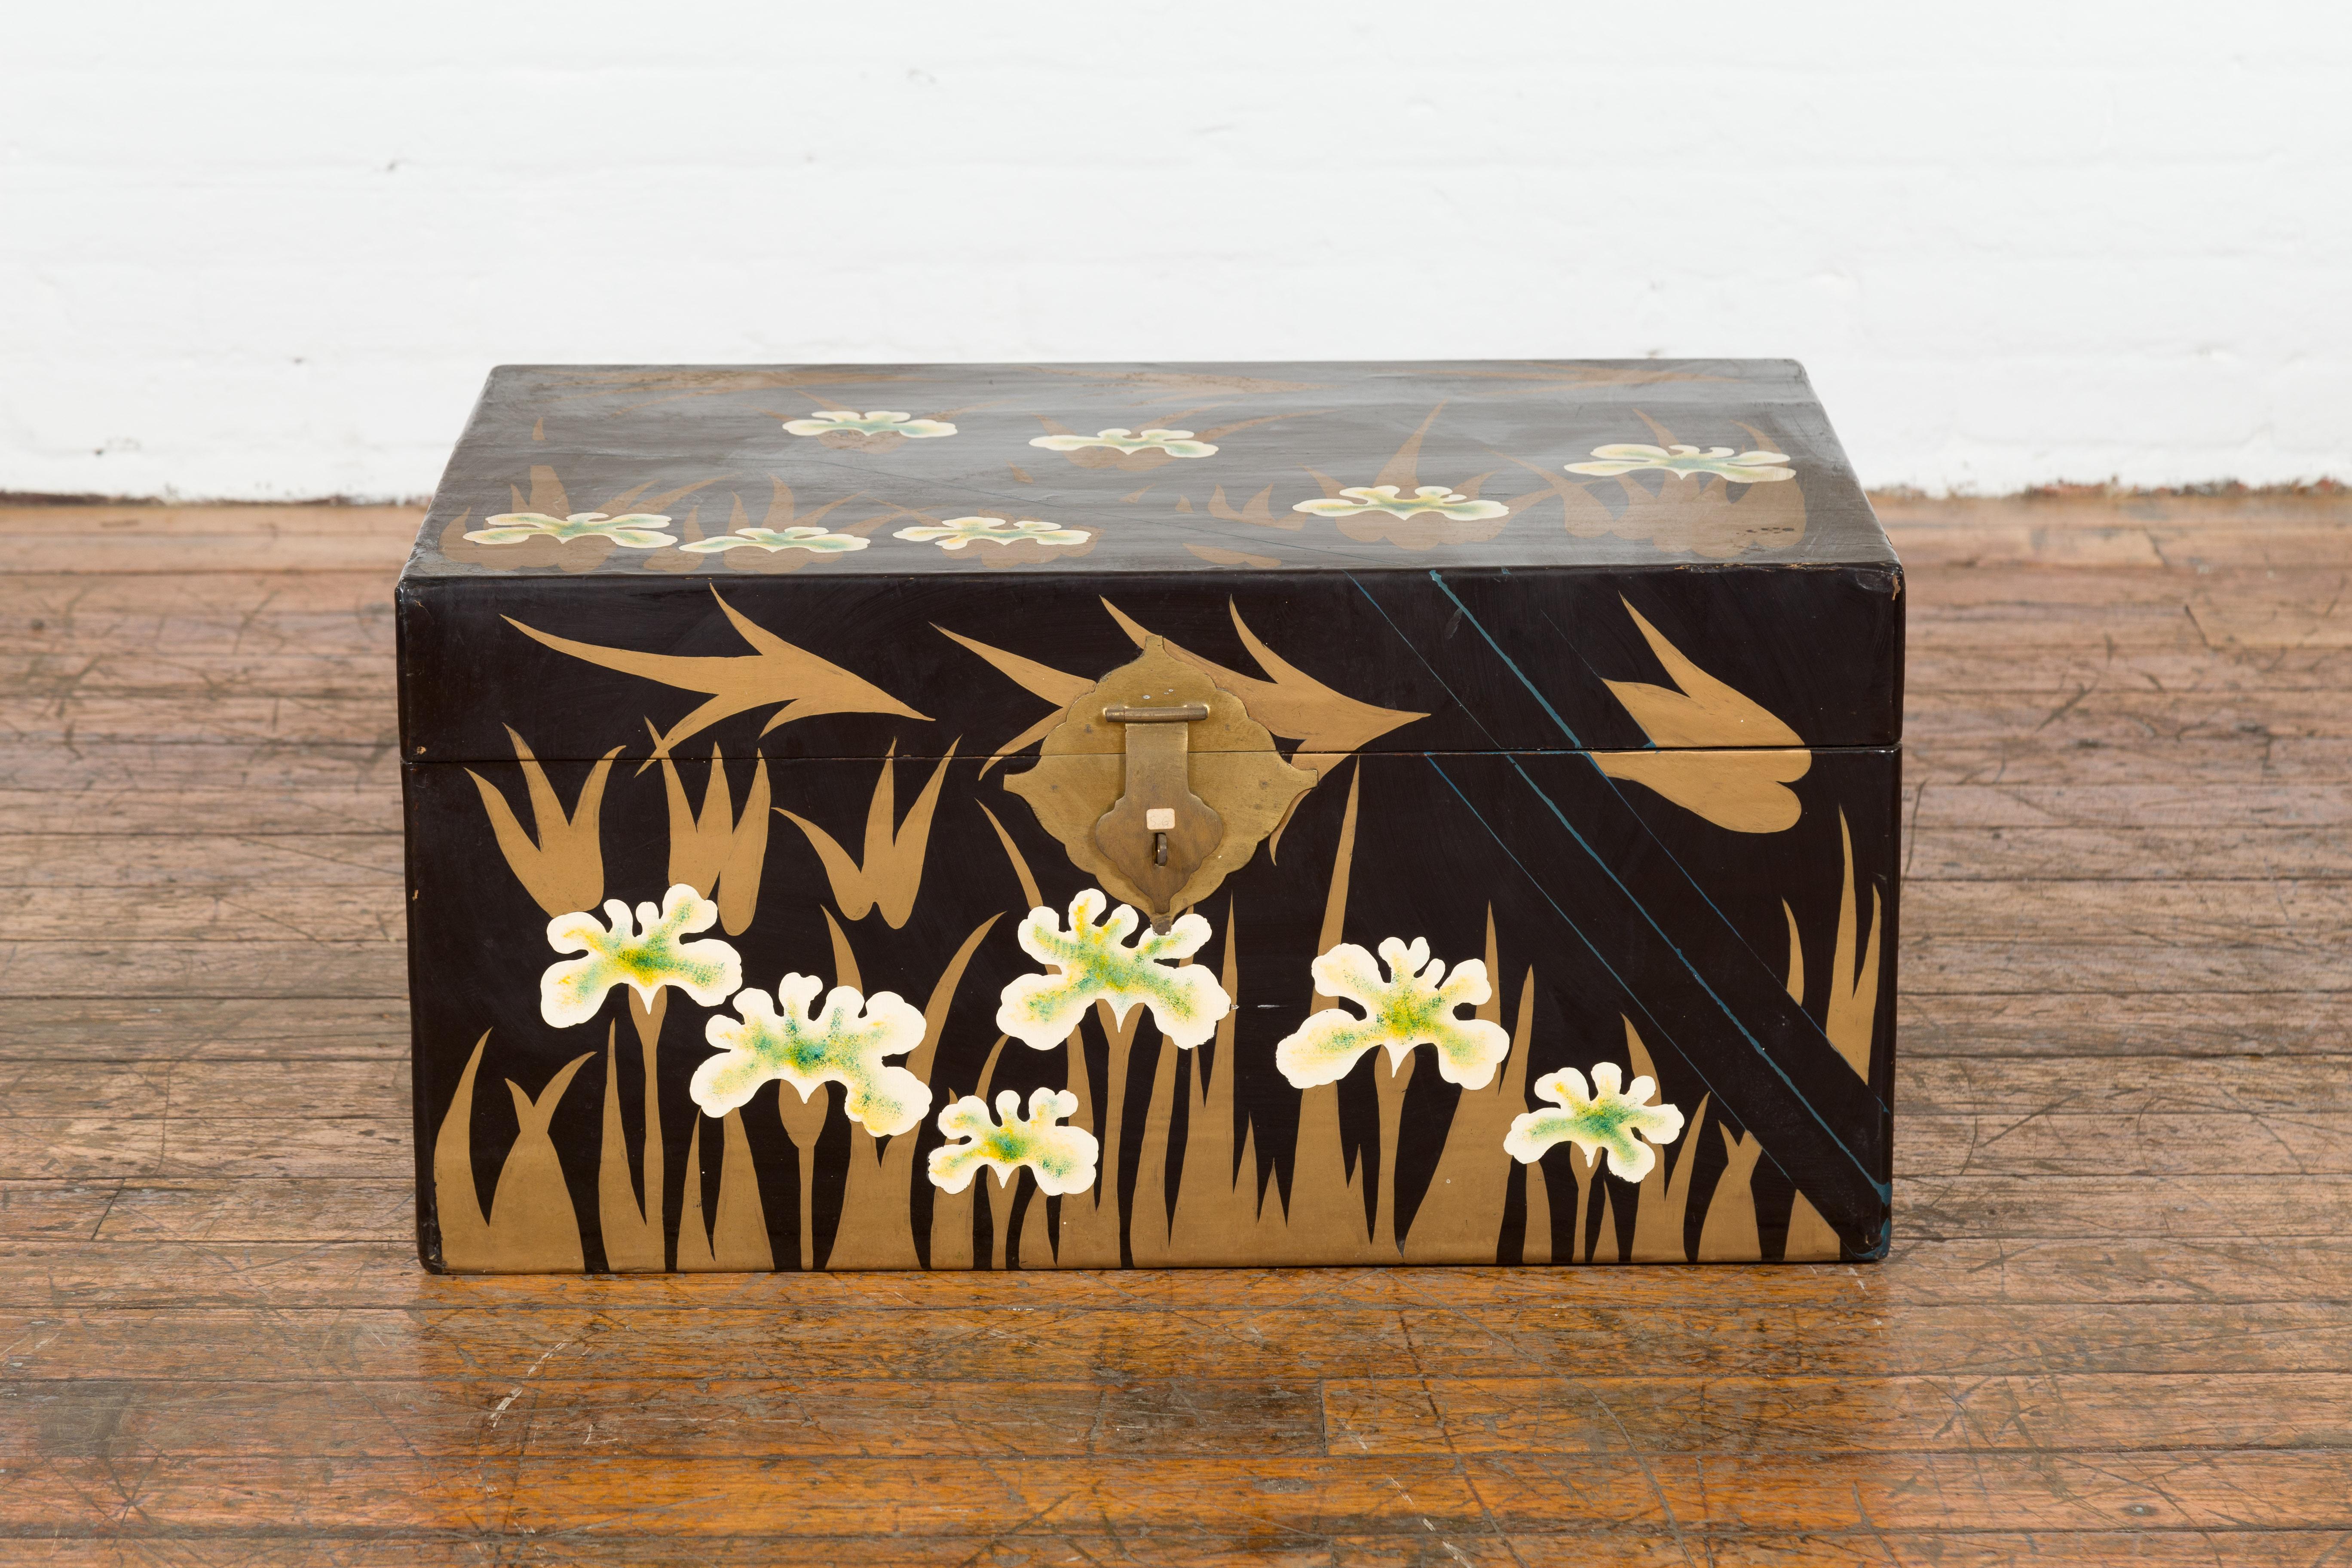 An antique Japanese late Meiji period black lacquer blanket chest from the early 20th century, with gold, white and green floral décor, brass hardware and blue painted accents. Created in Japan during the late Meiji period in the early 20th century,